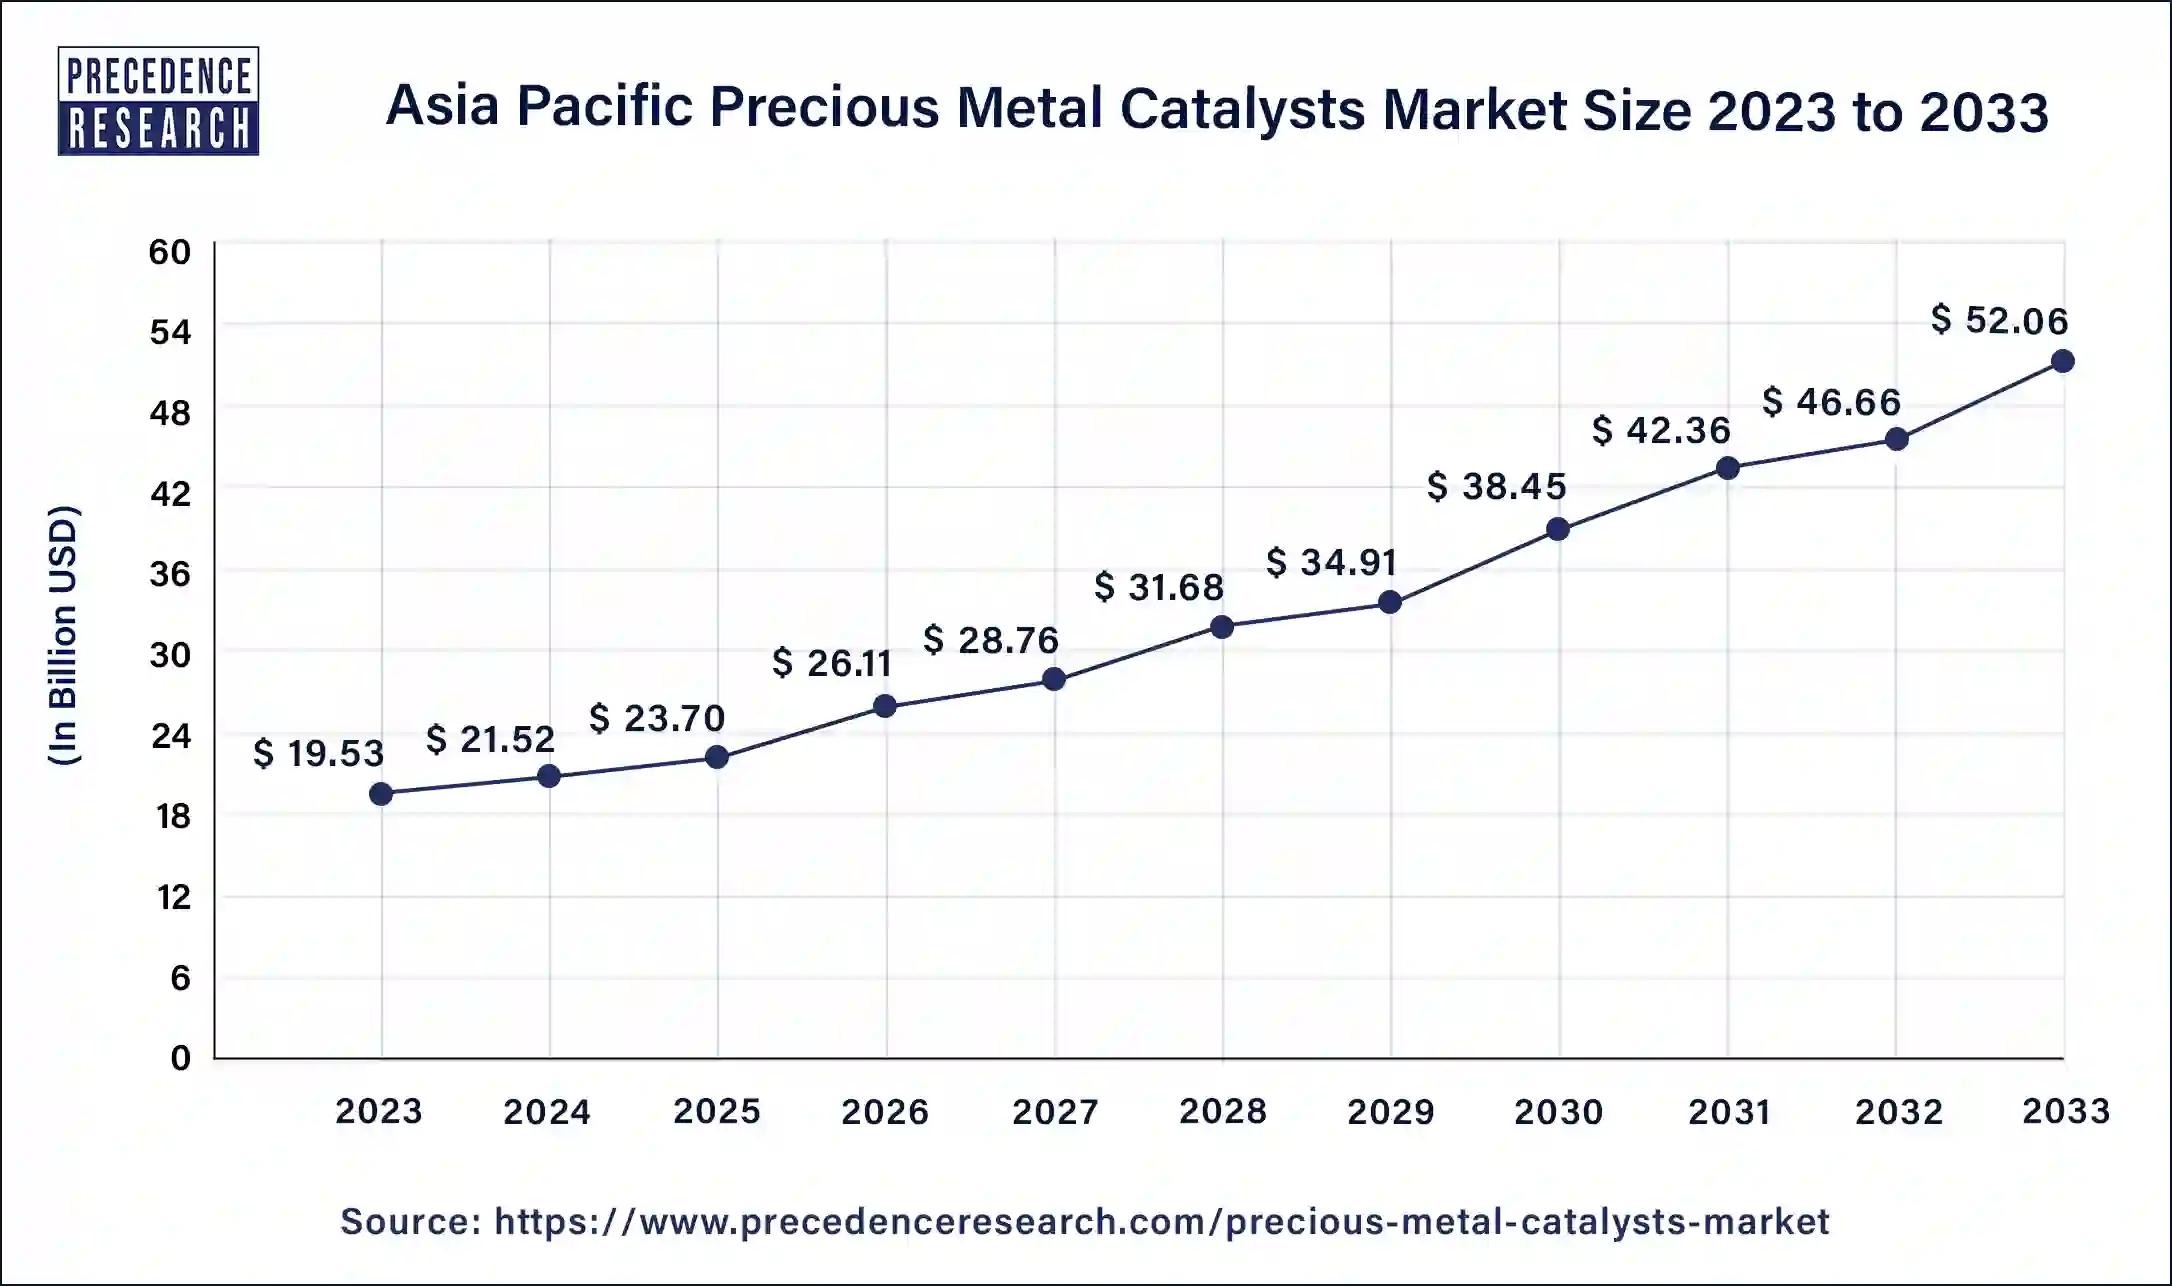 Asia Pacific Precious Metal Catalysts Market Size 2024 to 2033